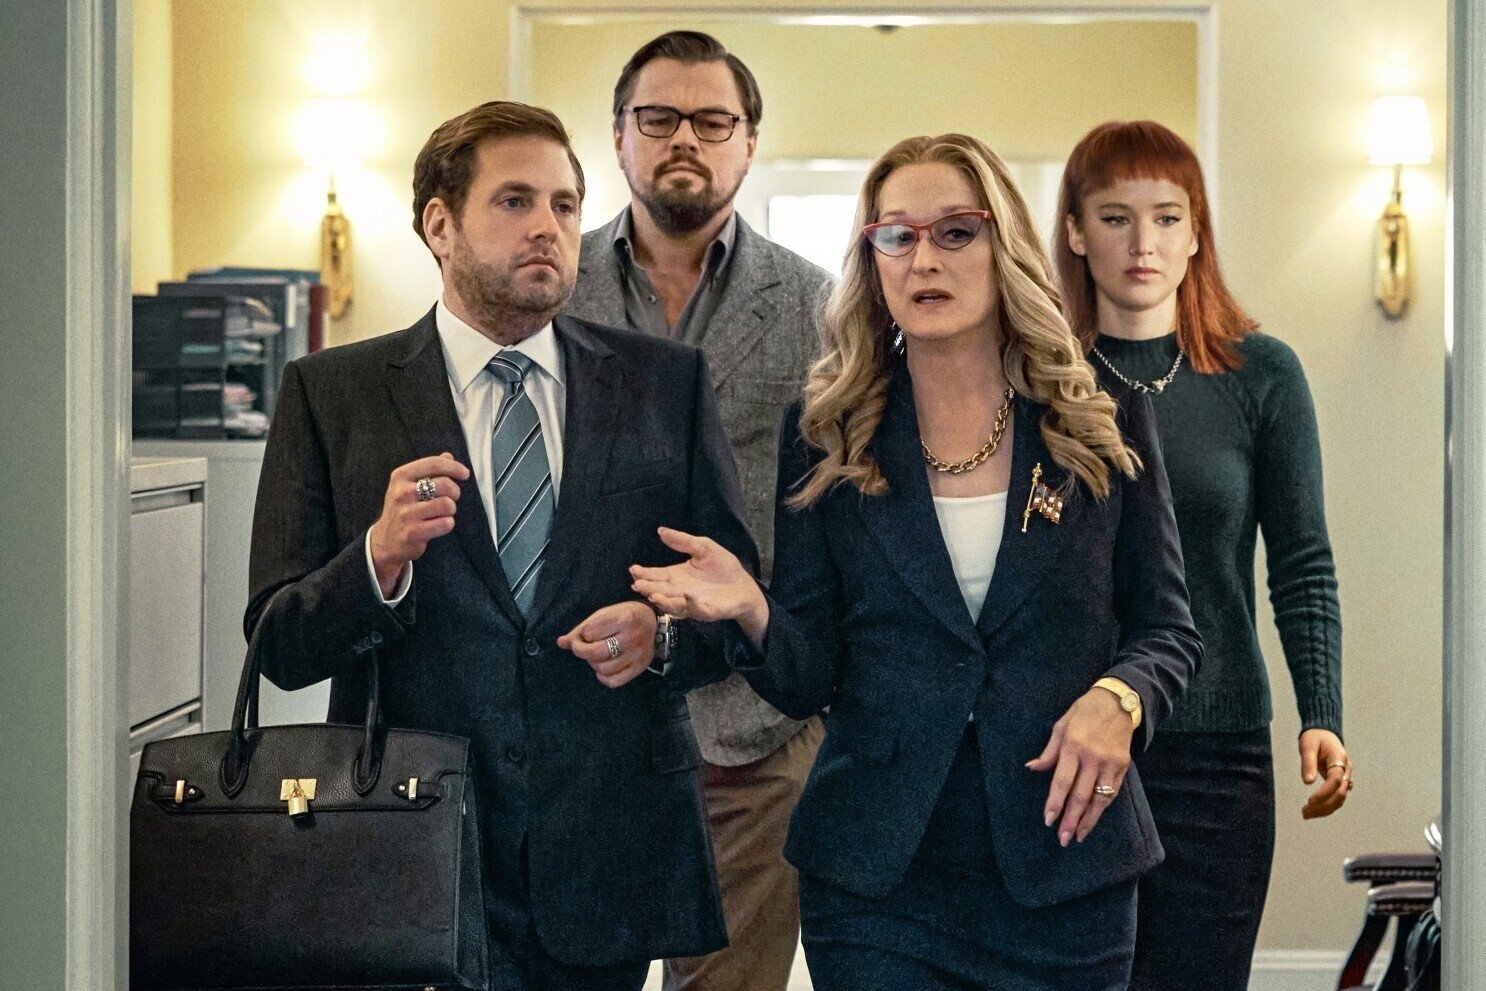 Jonah Hill (L), Leonardo DiCaprio (C-L), Meryl Streep (C-R) and Jennifer Lawrence, in a scene from the film "Don&#039;t Look Up."